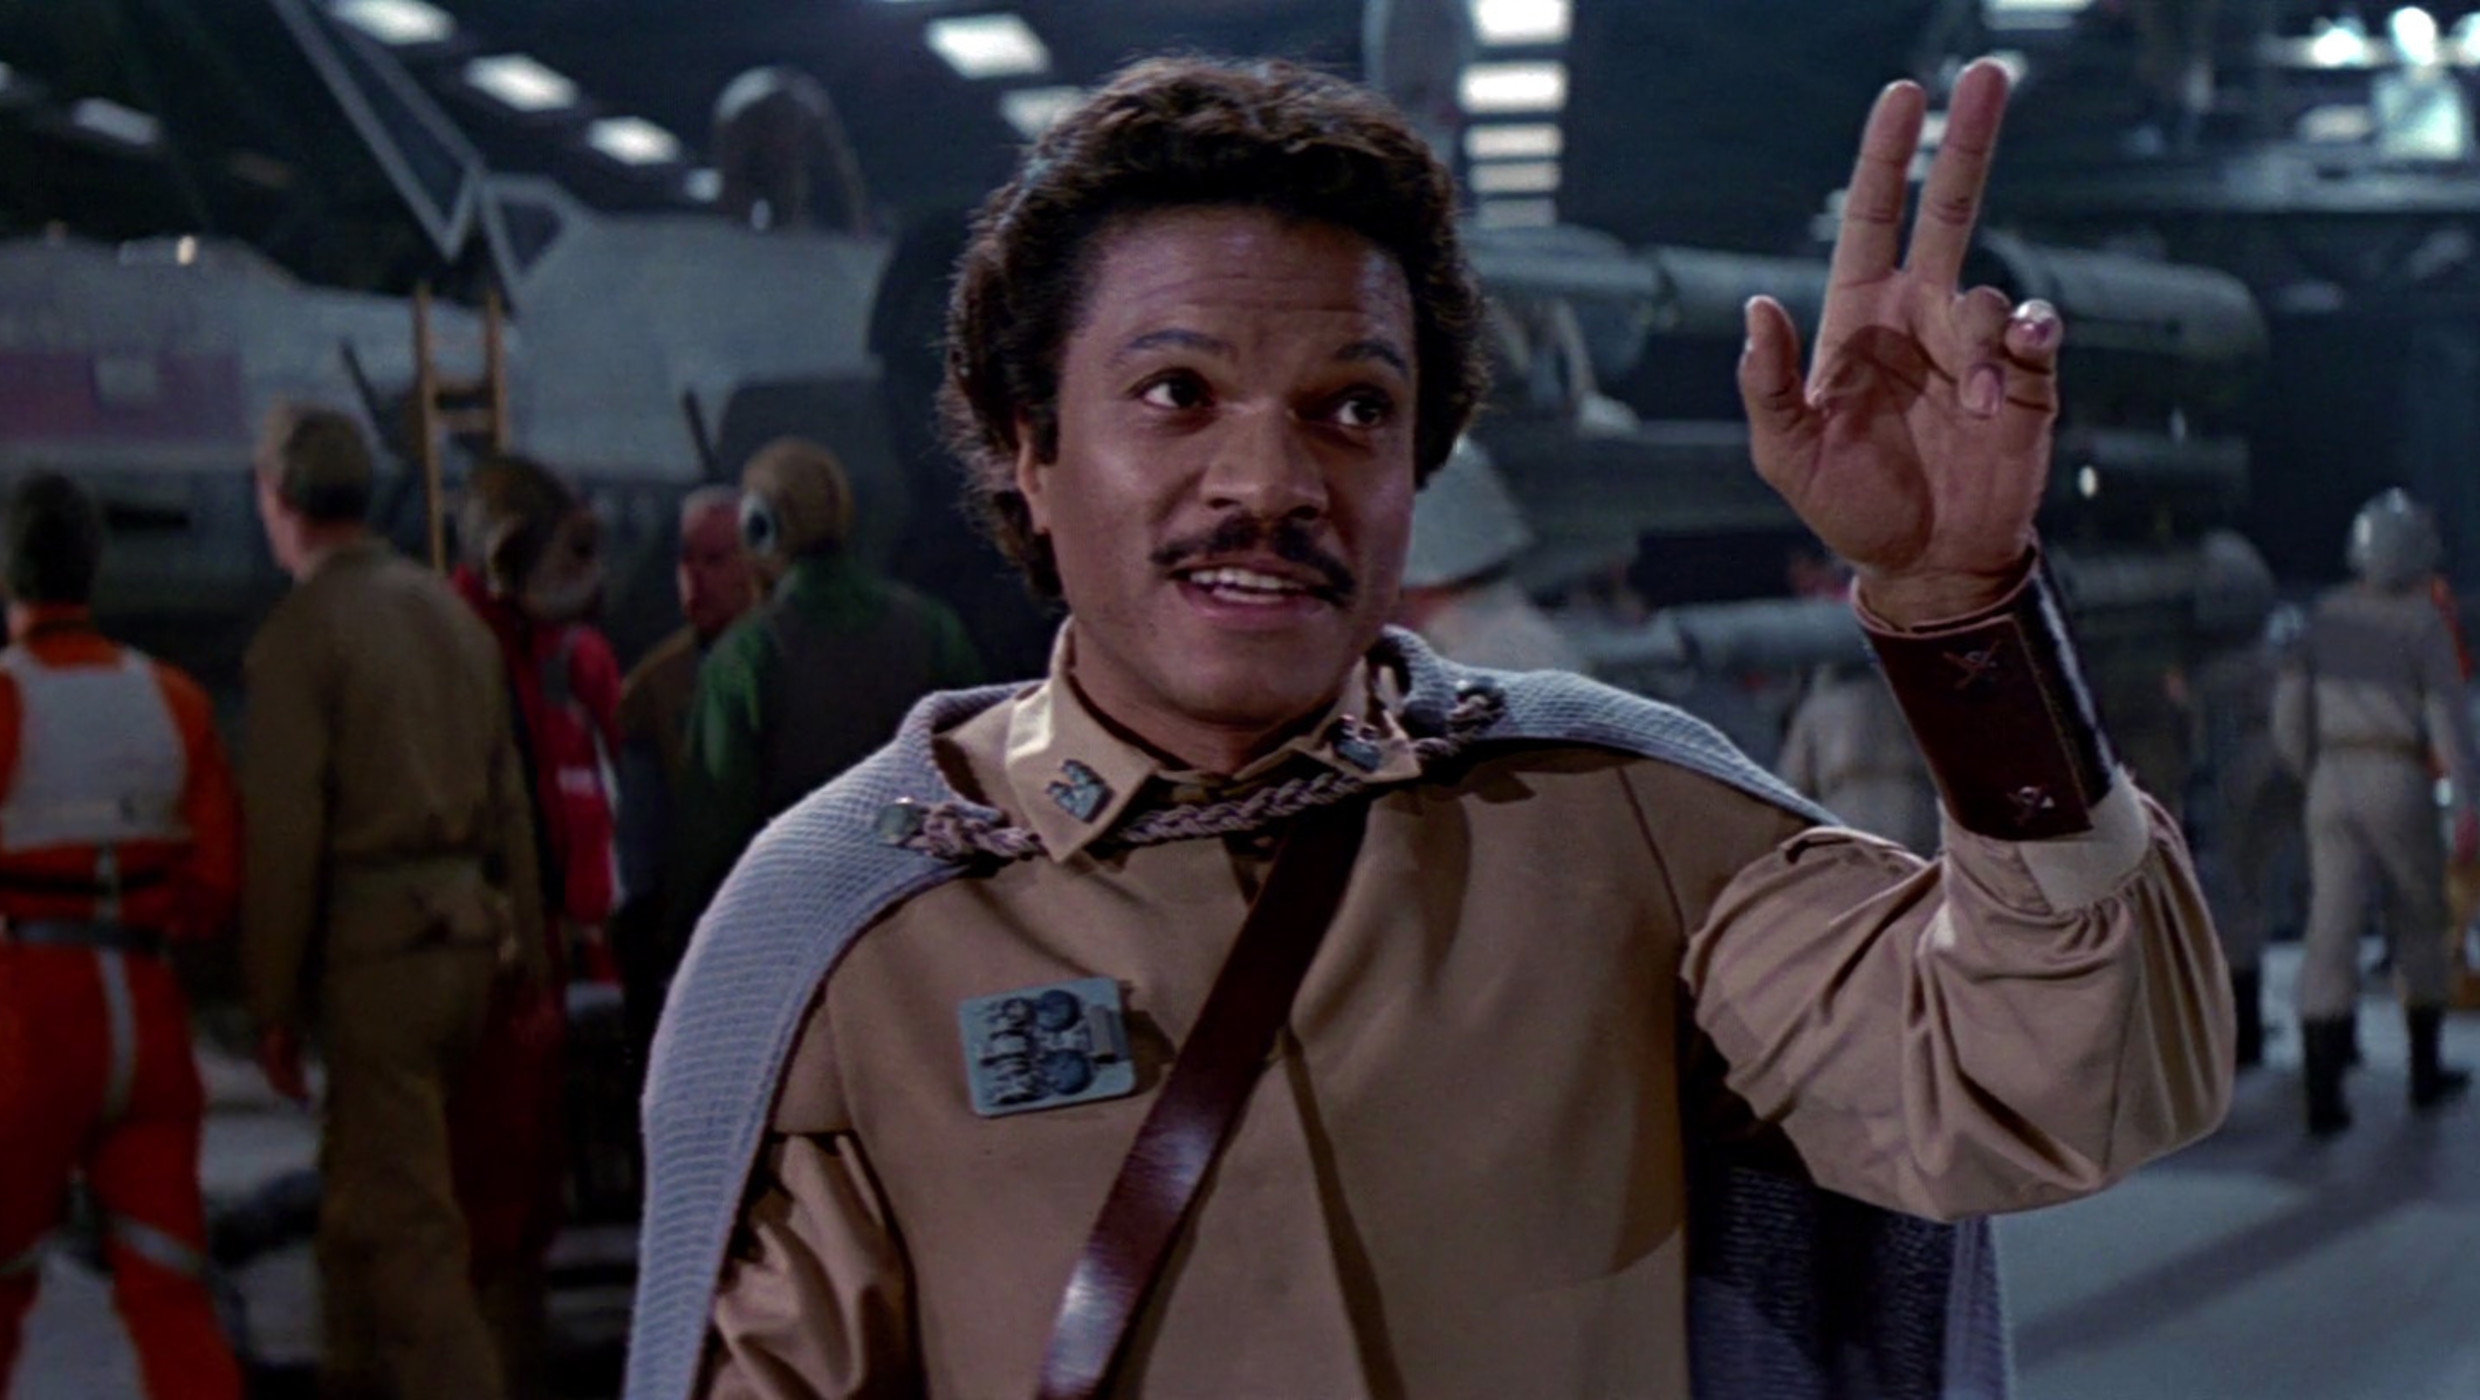 Rumor of the Day: Billy Dee Williams may finally return as Lando in Star Wars: Episode IX